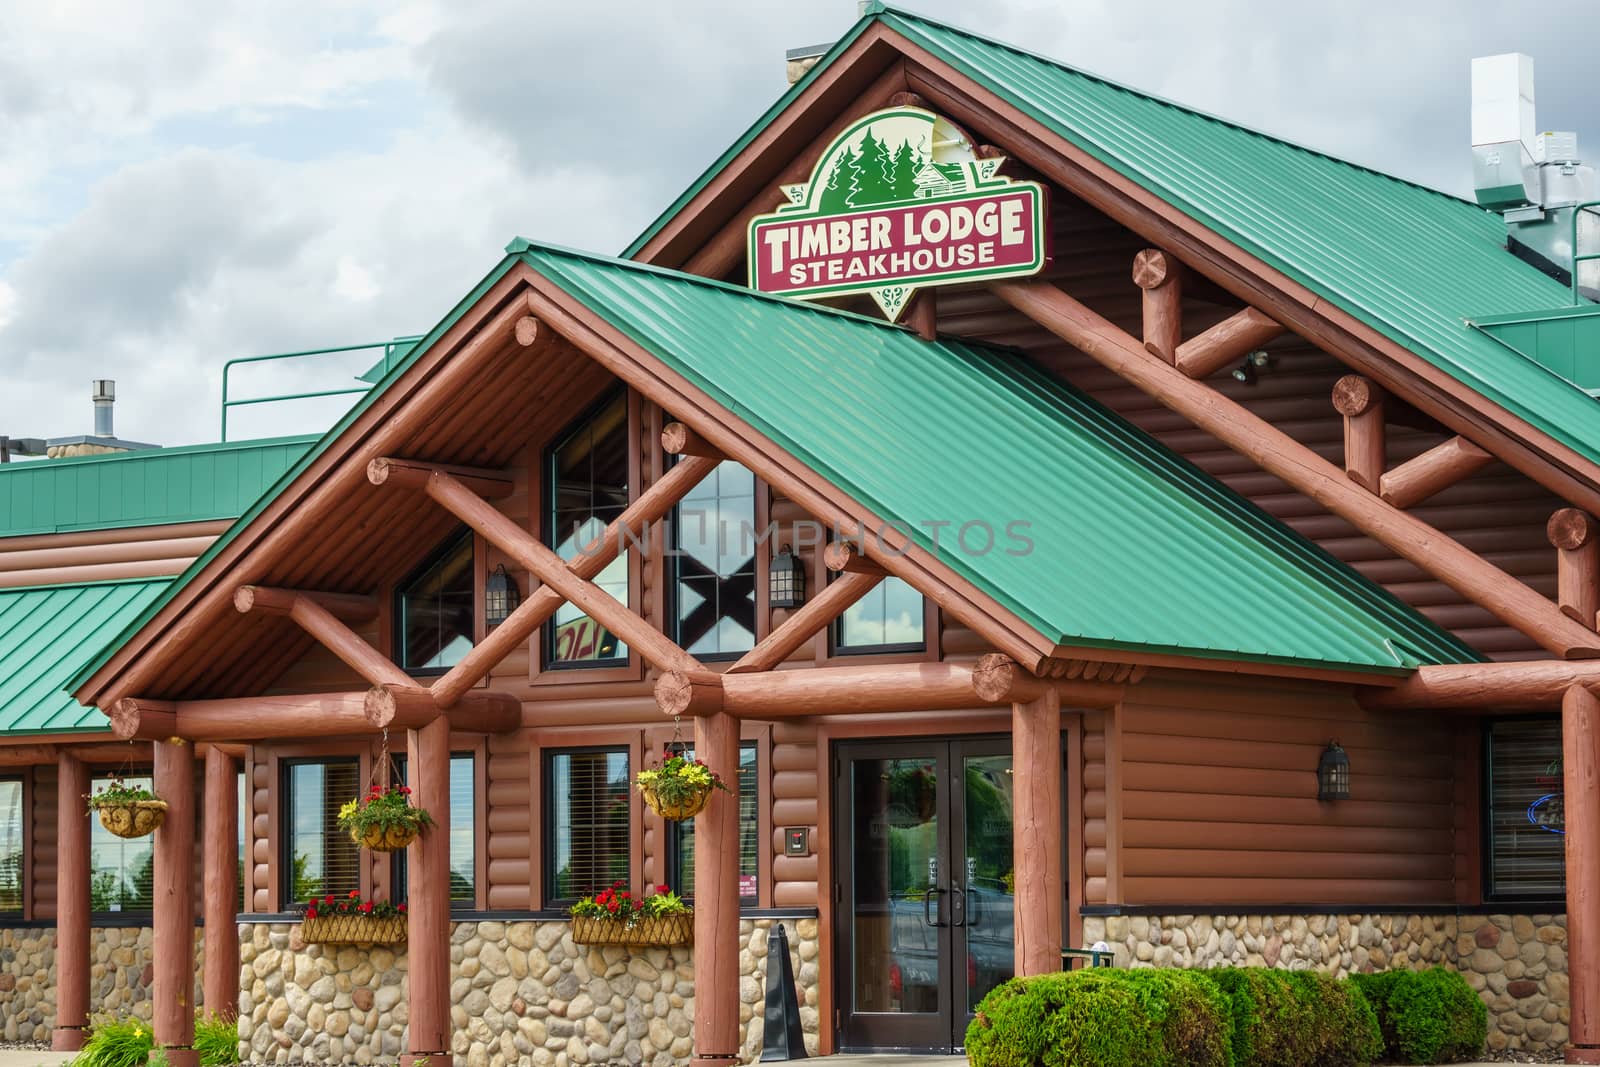 Timber Lodge Steakhouse by wolterk